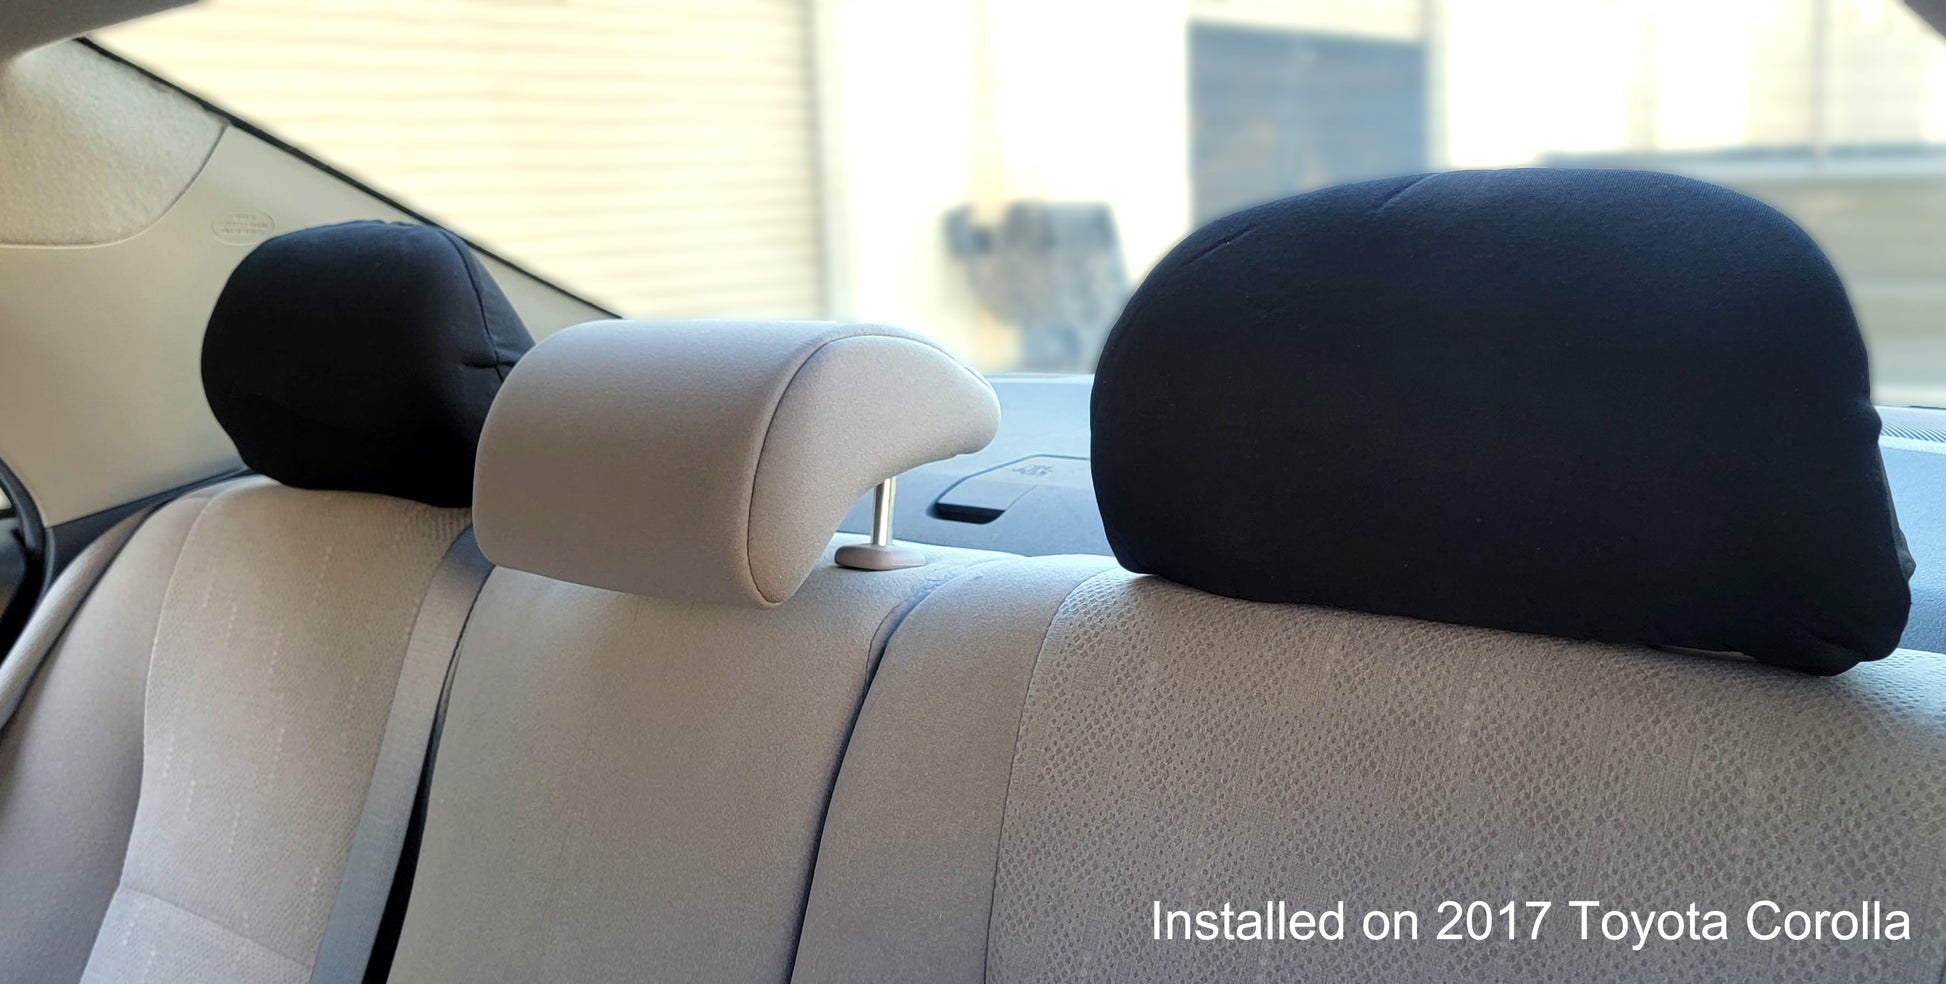 2X Cars Trucks & Cover Plain Solid Black Polyester Universal Headrest Cover installed on rear headrests.                    